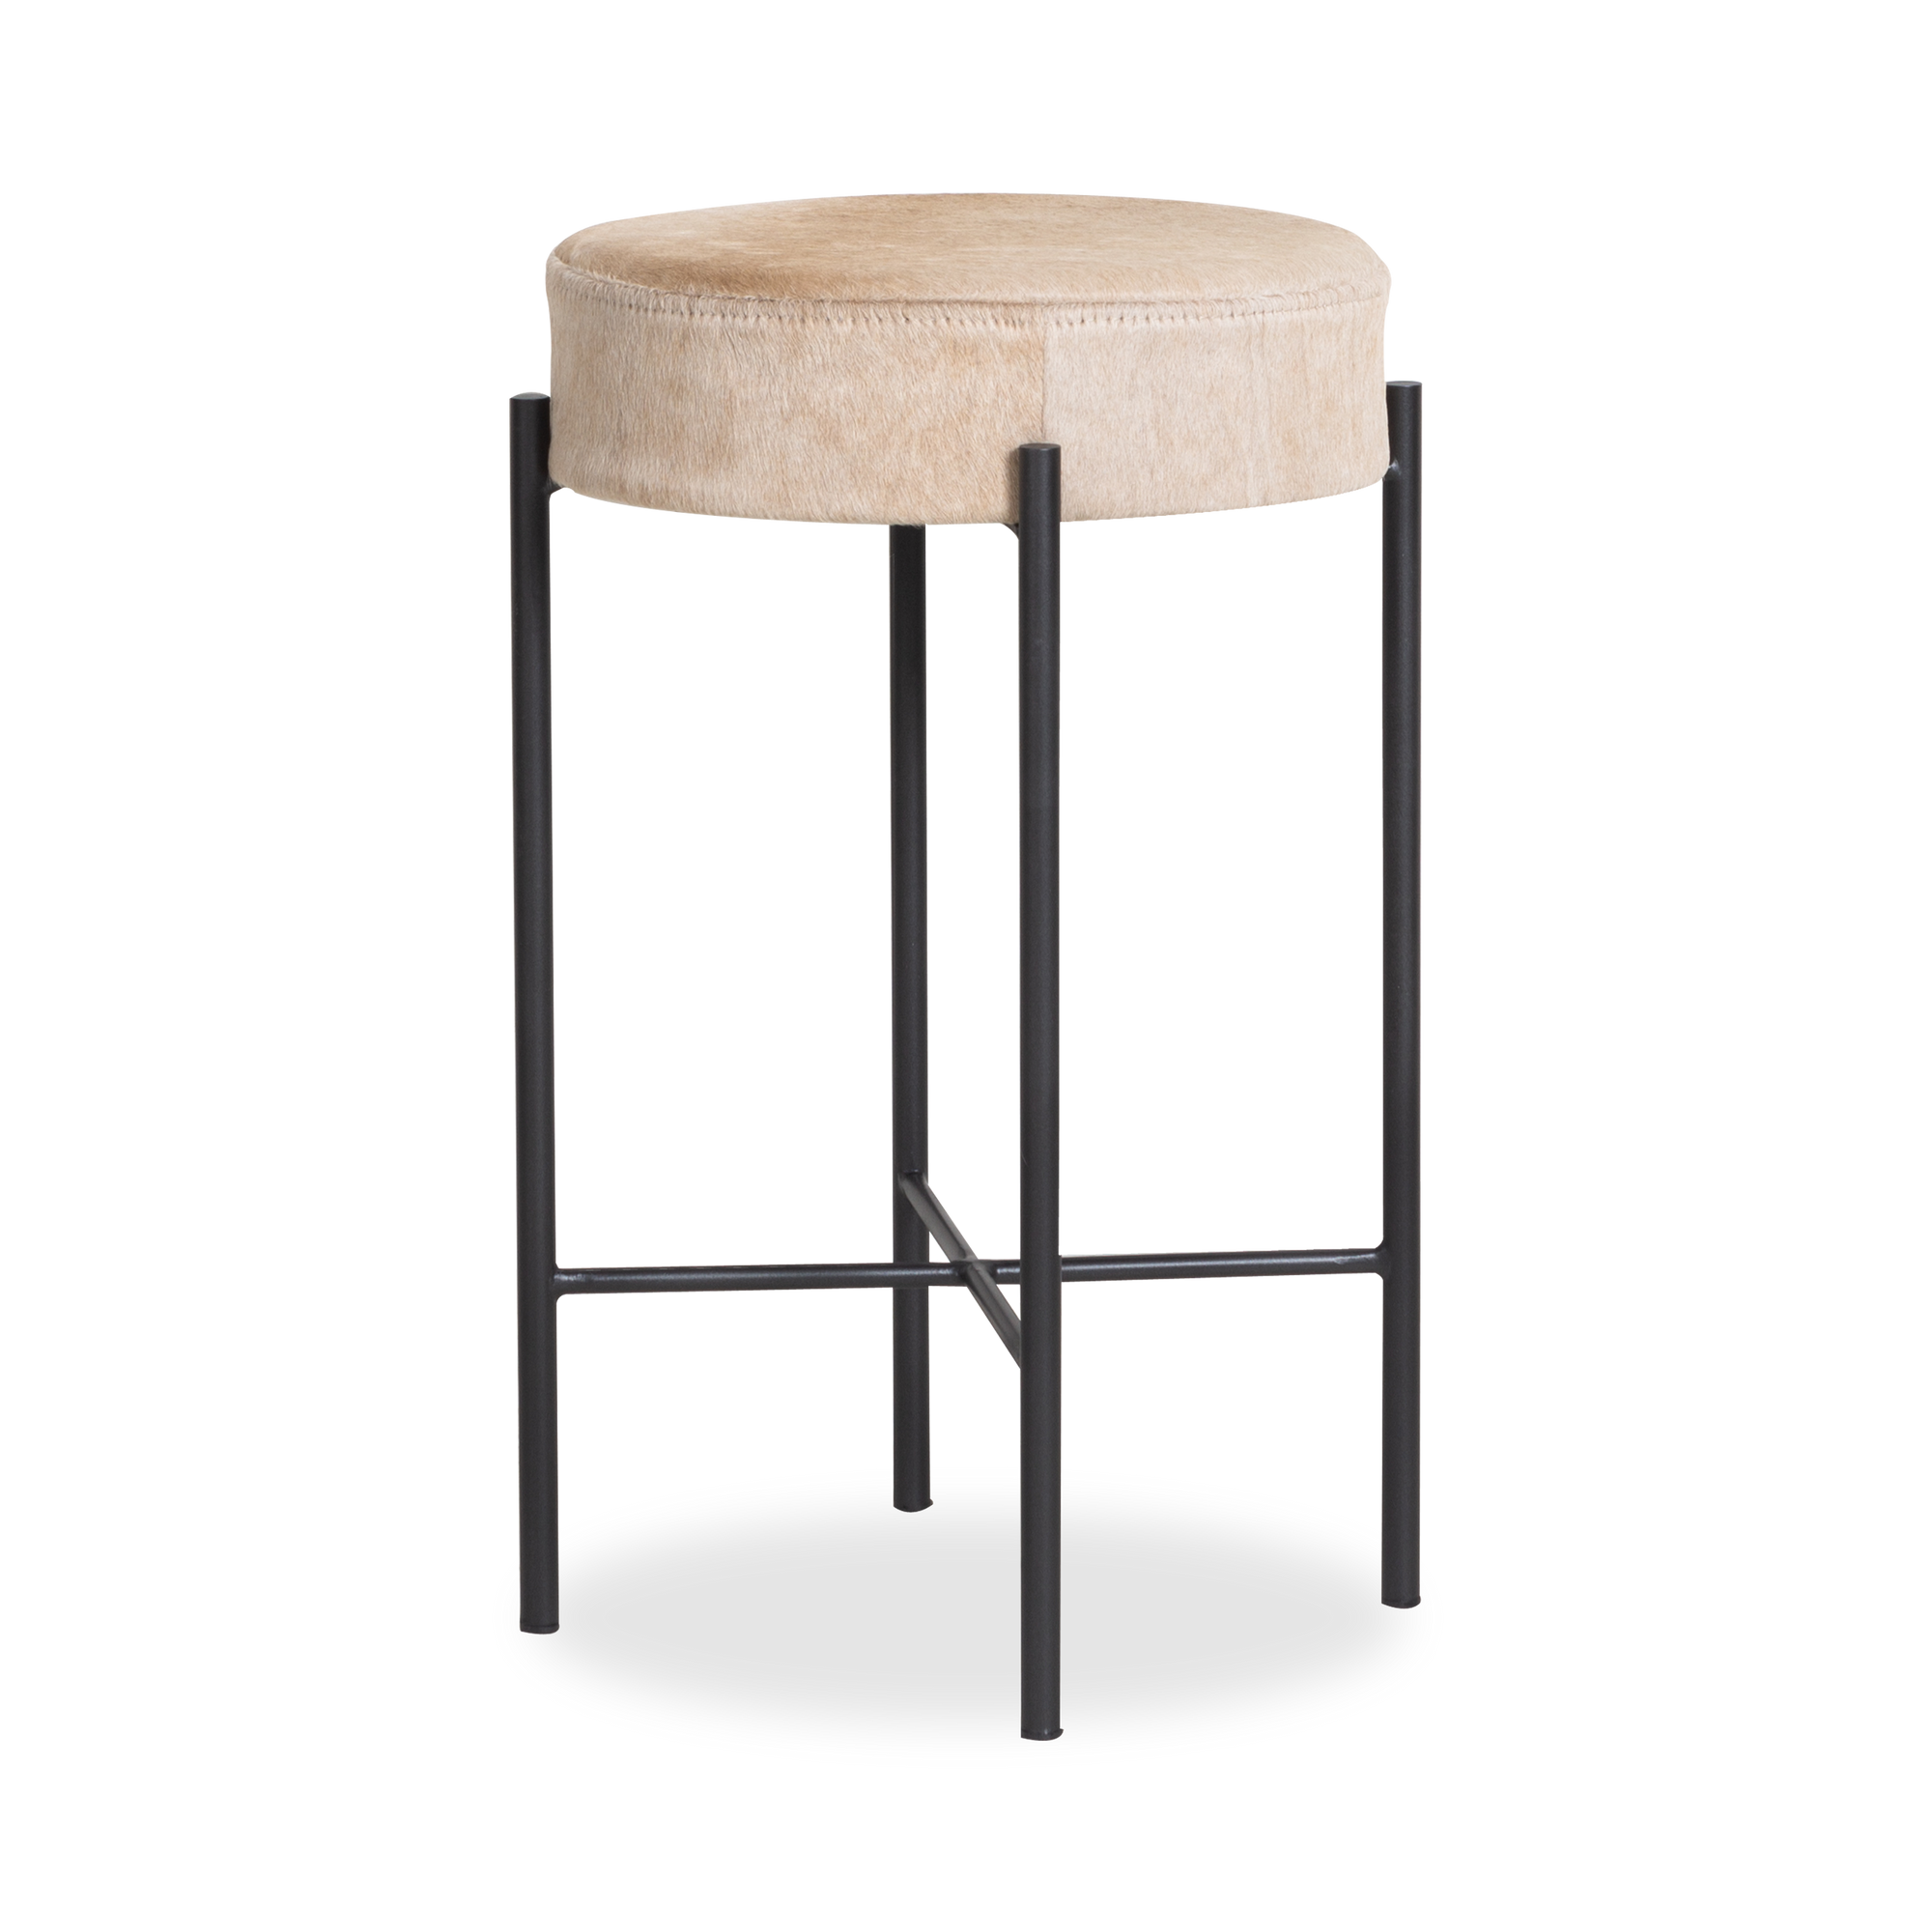 With its playful mix of materials, the Donato Counter Stool offers a cool modern minimalism.